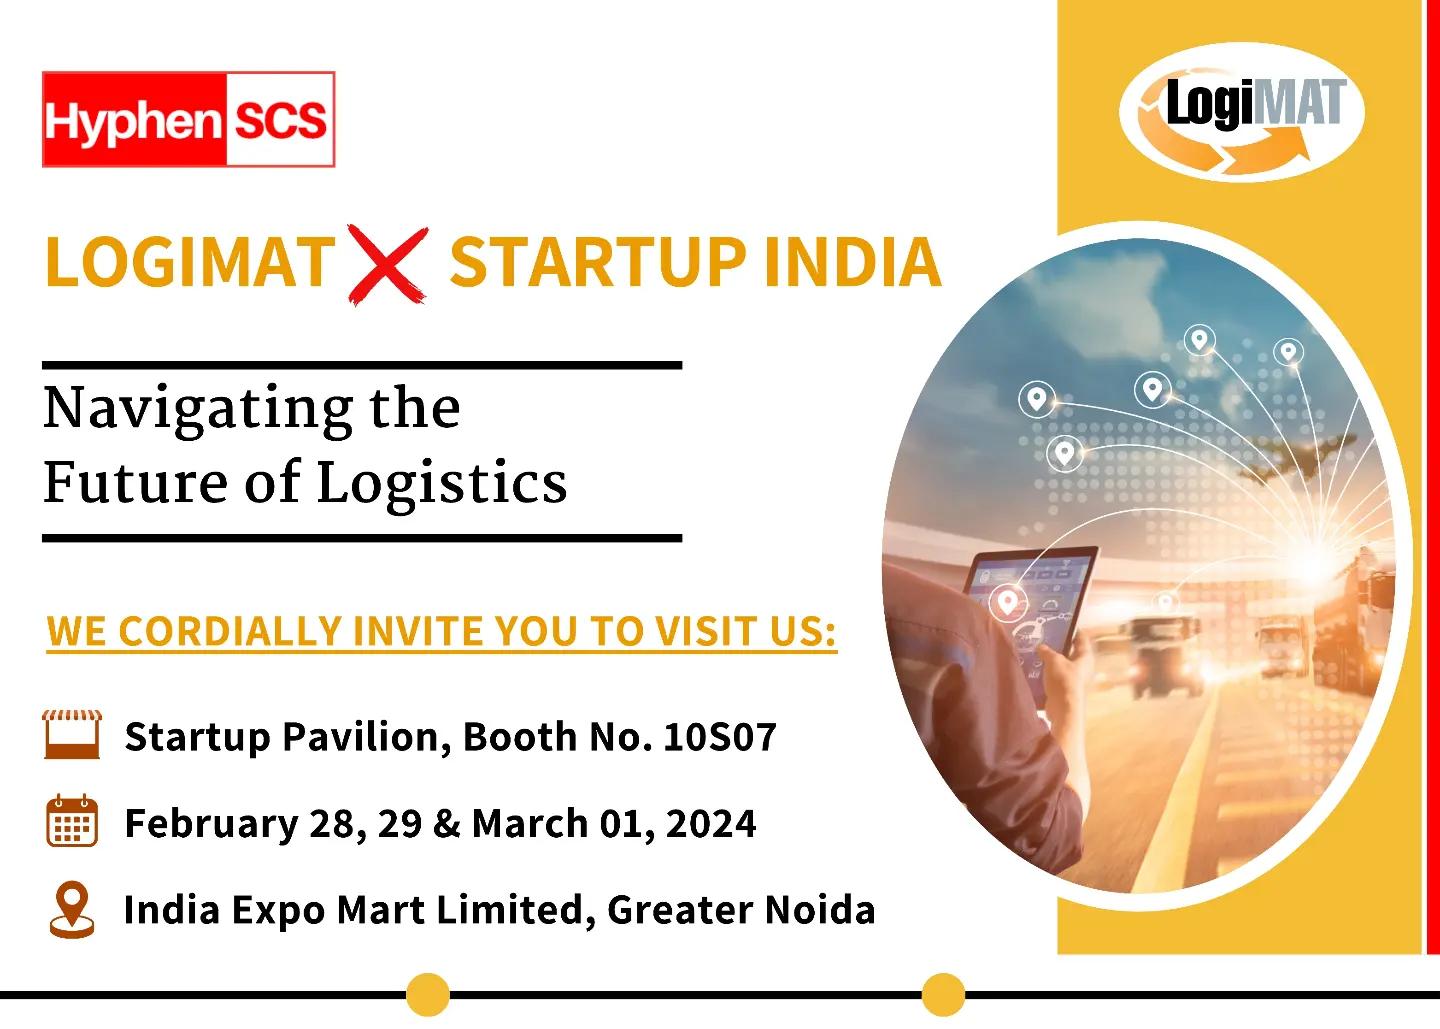 Hyphen SCS to Exhibit at LogiMAT India 2024, the Nation’s Largest Logistics Exhibition